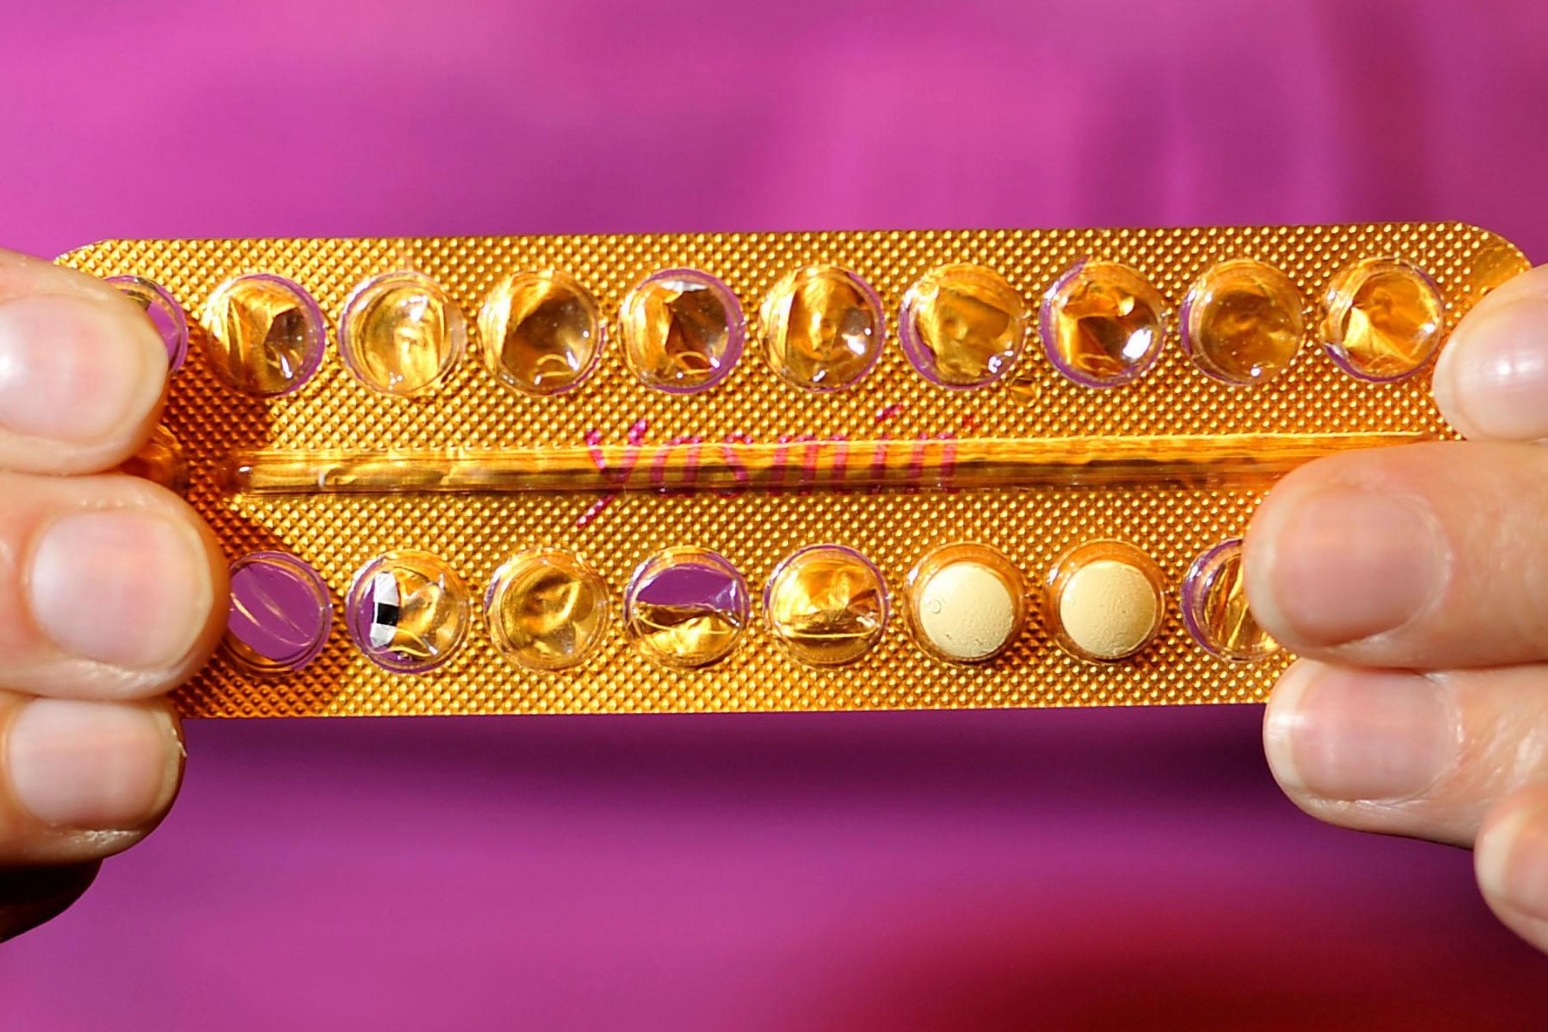 Any type of hormonal contraceptive may increase risk of breast cancer – study 